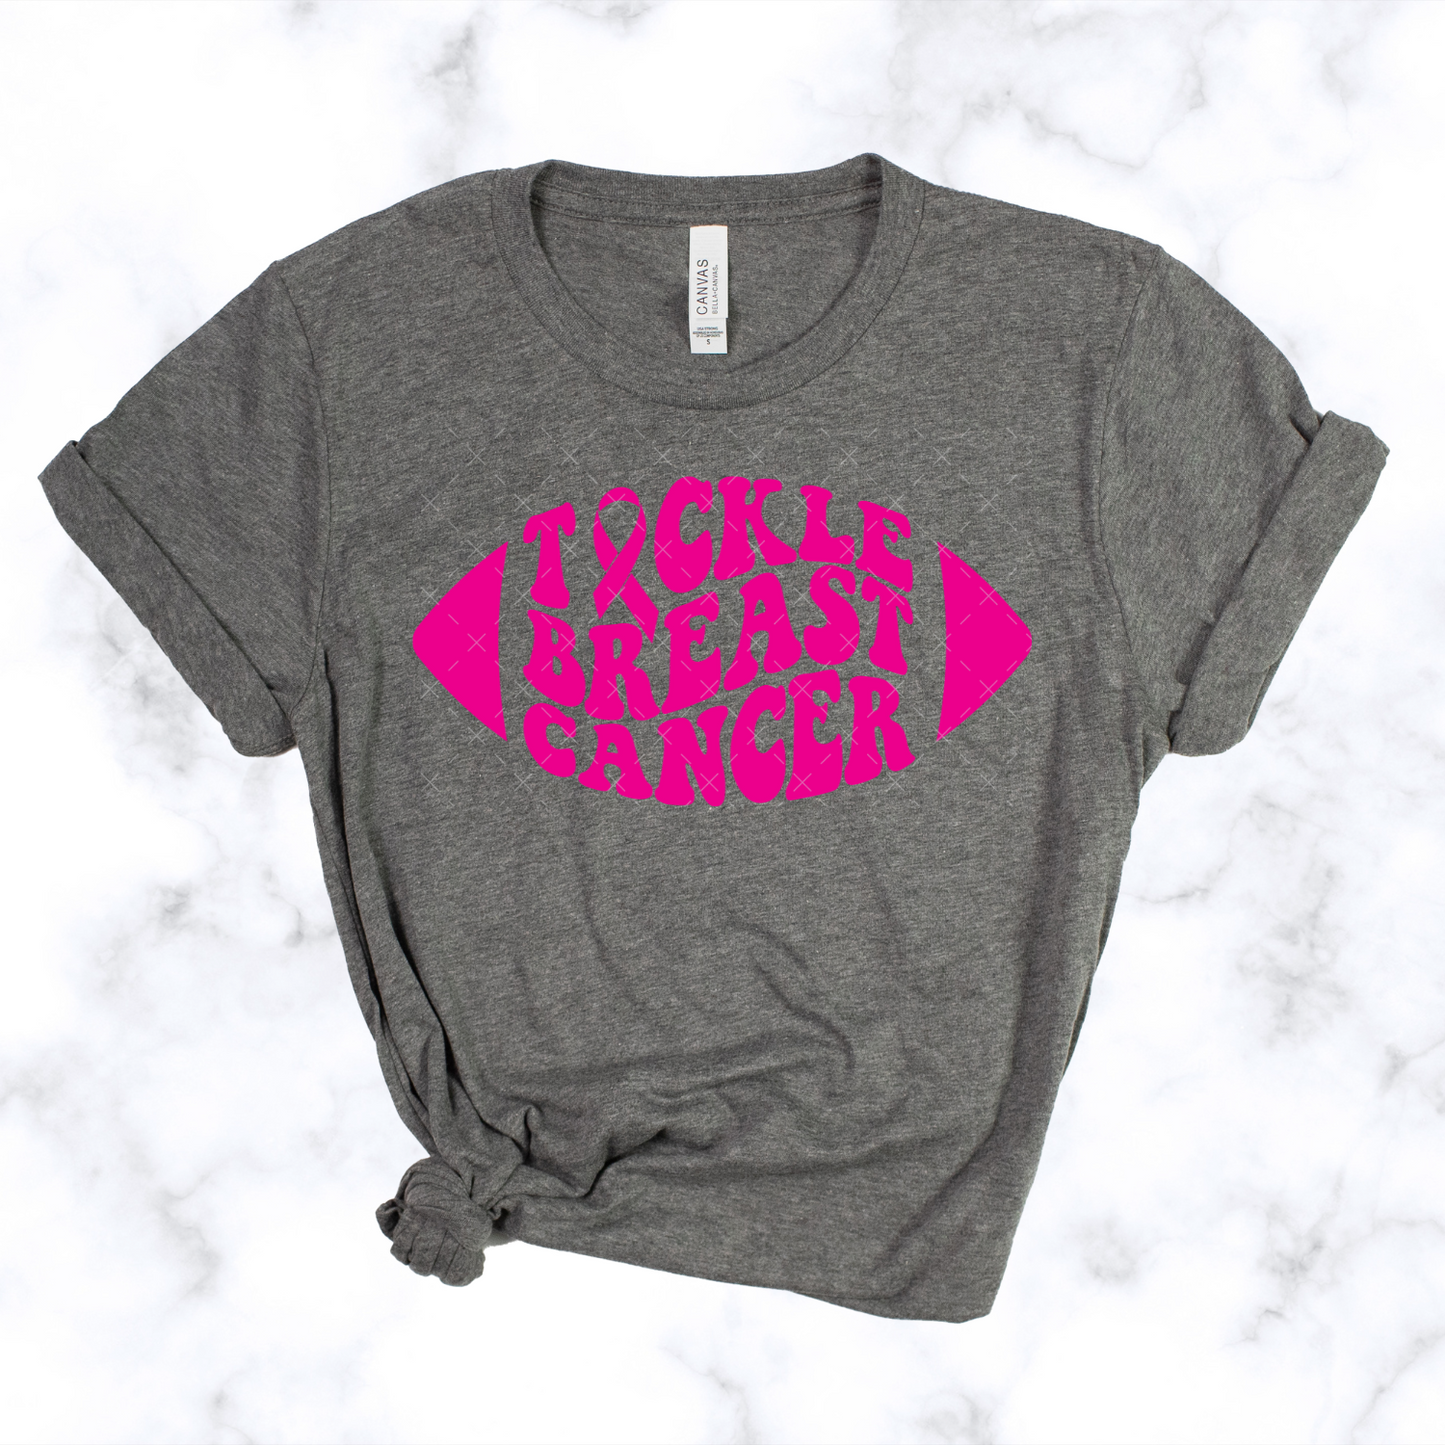 Tackle Breast Cancer Football Tee Youth